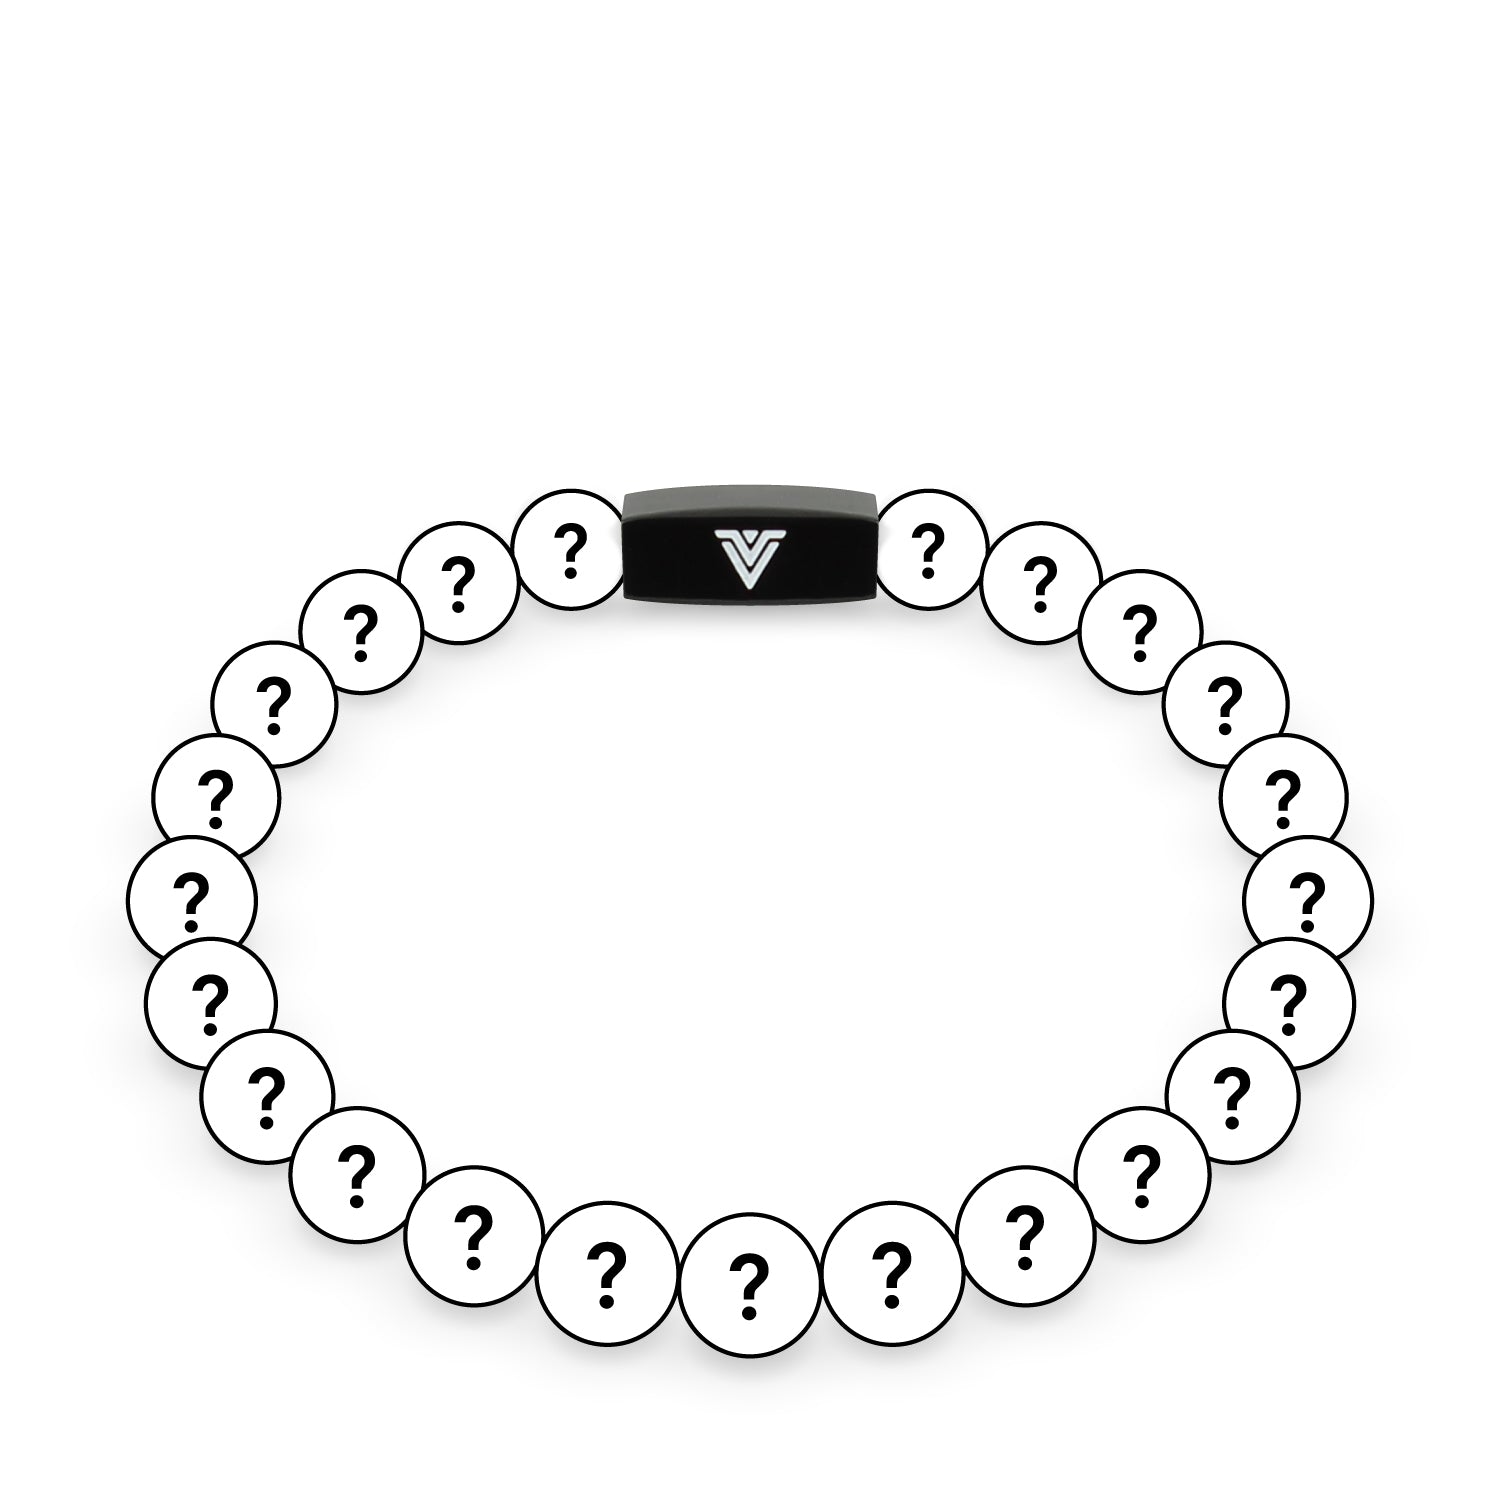 Front view of an 8mm Mystery crystal beaded stretch bracelet with black stainless steel logo bead made by Voltlin